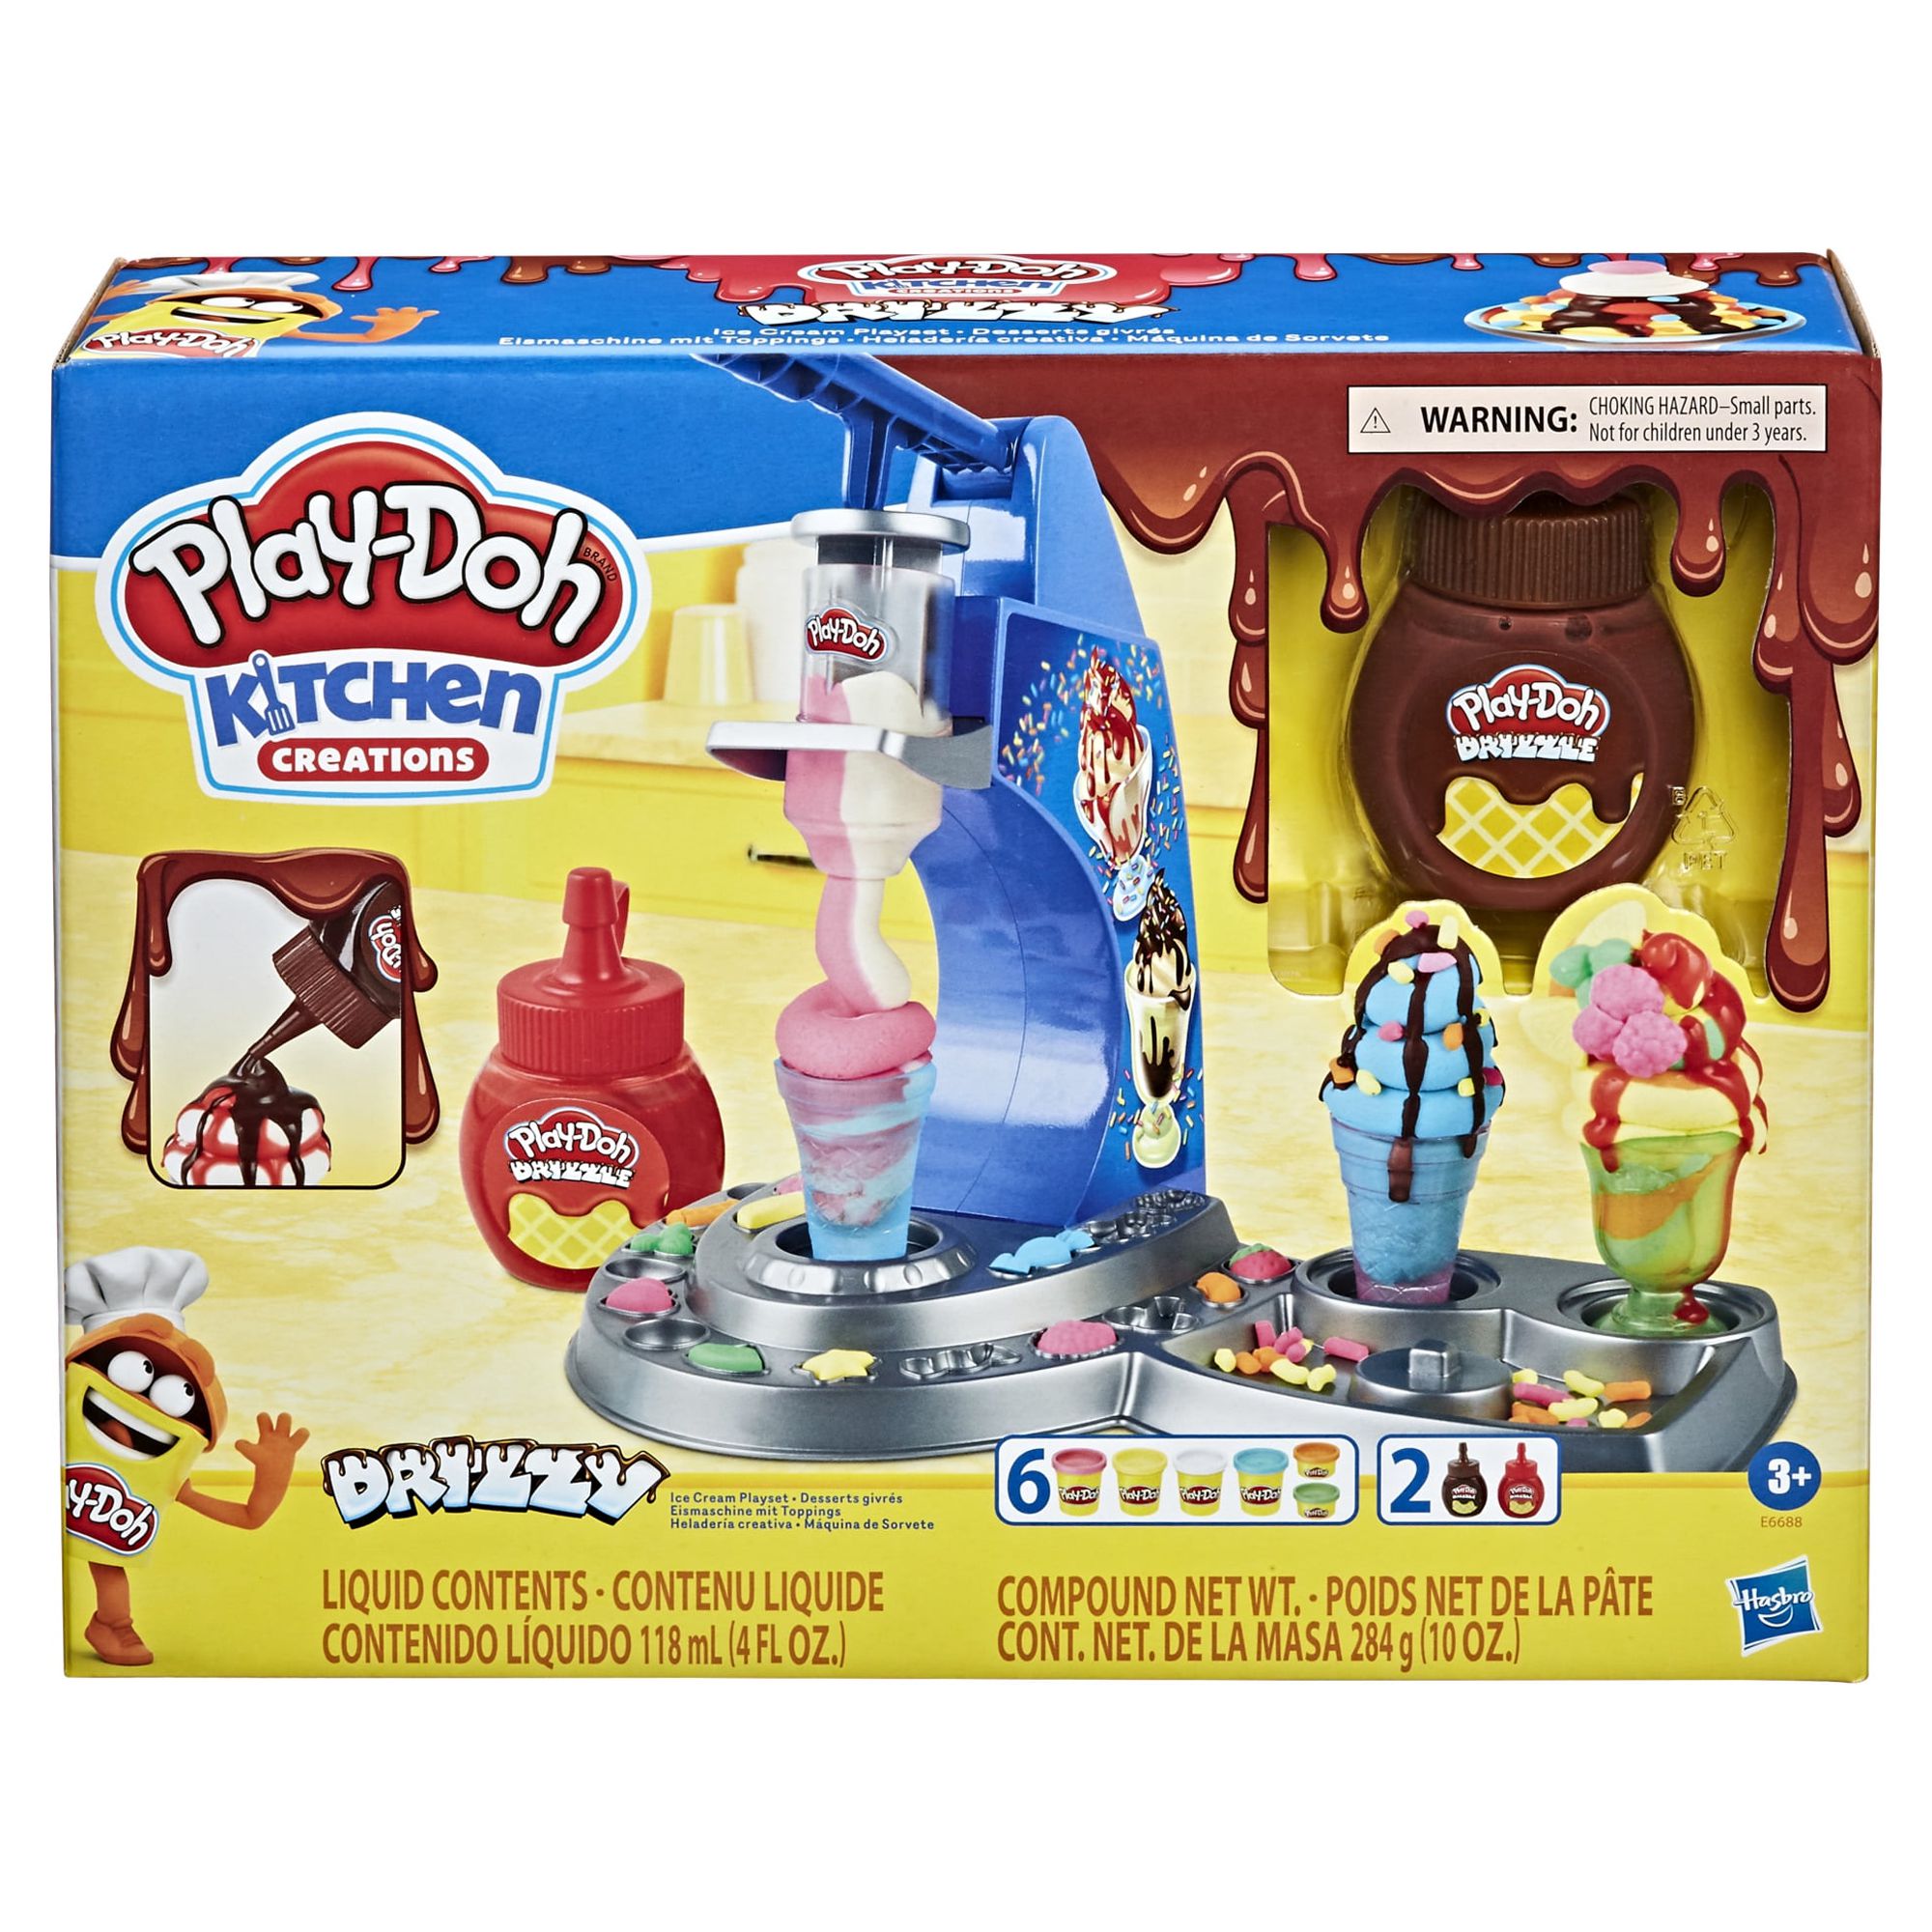 Play-Doh Kitchen Creations Drizzy Ice Cream Play Dough Set - 6 Color (6 Piece) - image 1 of 11